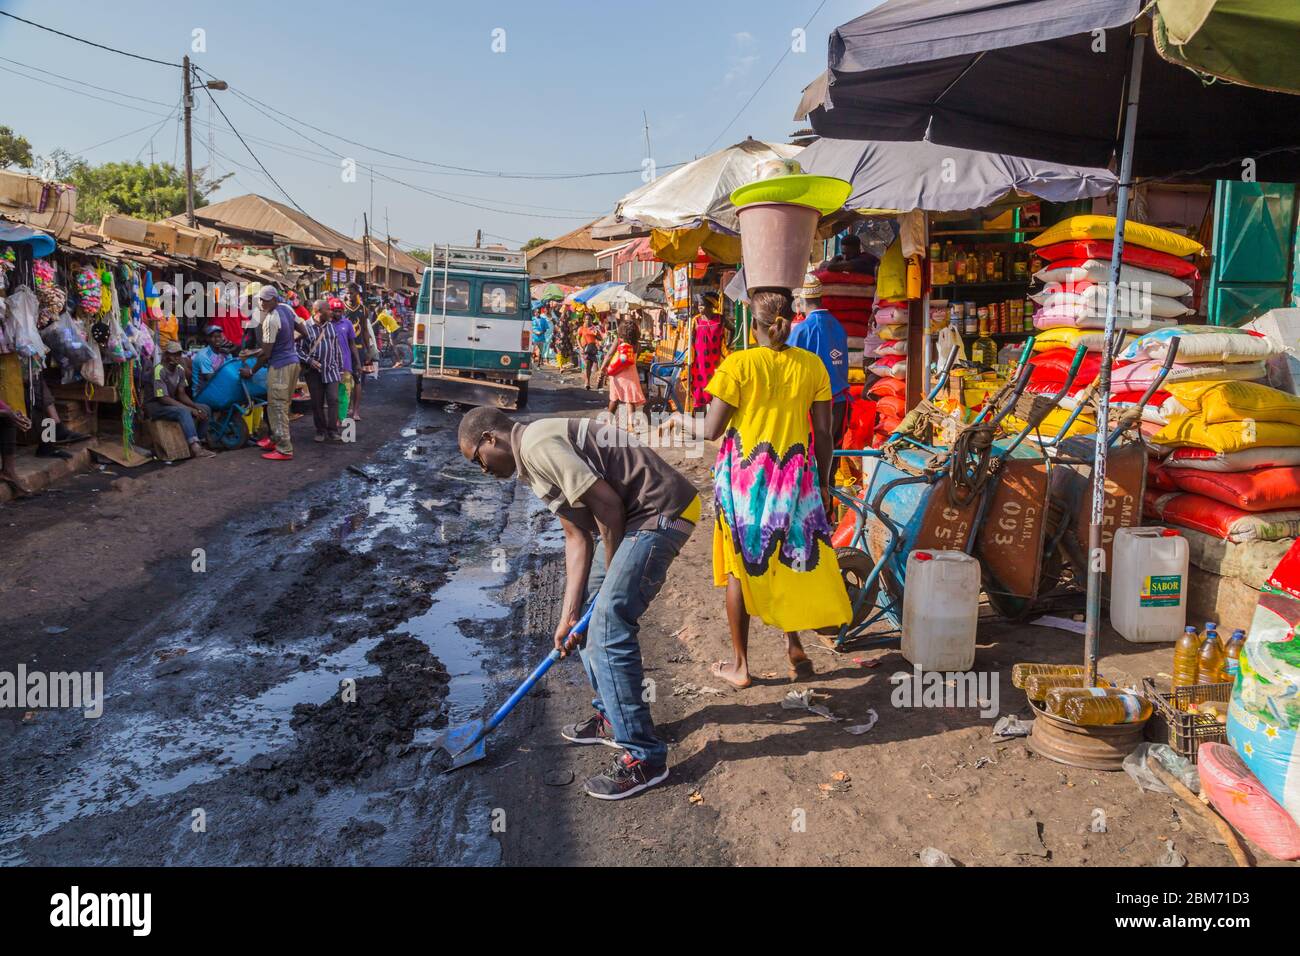 Bissau, Republic of Guinea-Bissau - January 6, 2020: Street scene in the city of Bissau with people at the street market, Guinea Bissau Stock Photo